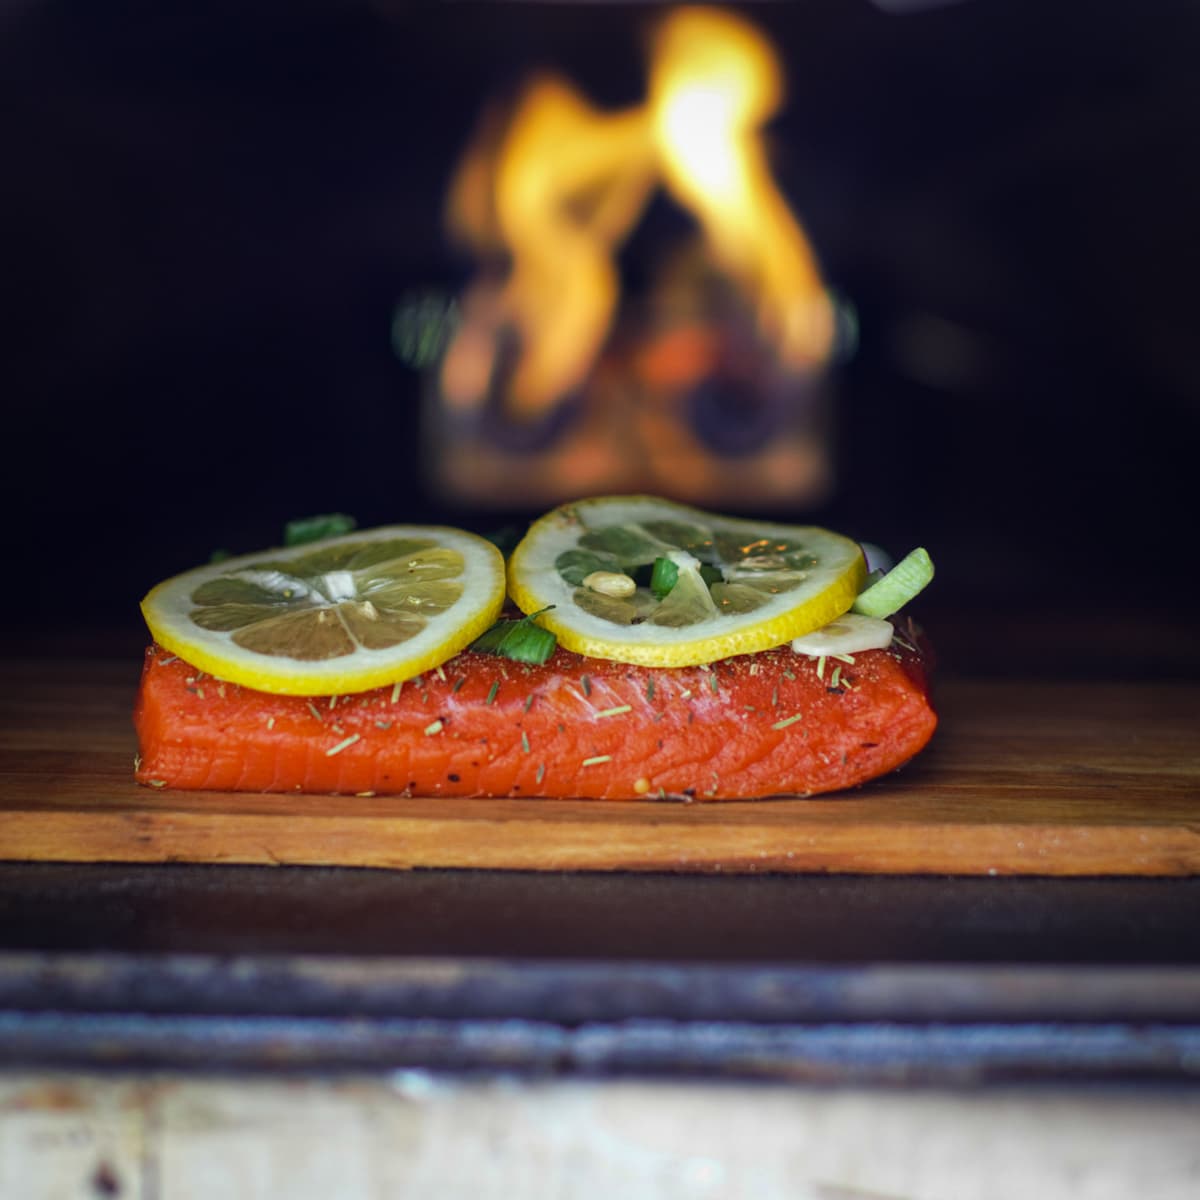 Wood plank salmon in an Ooni pizza oven.